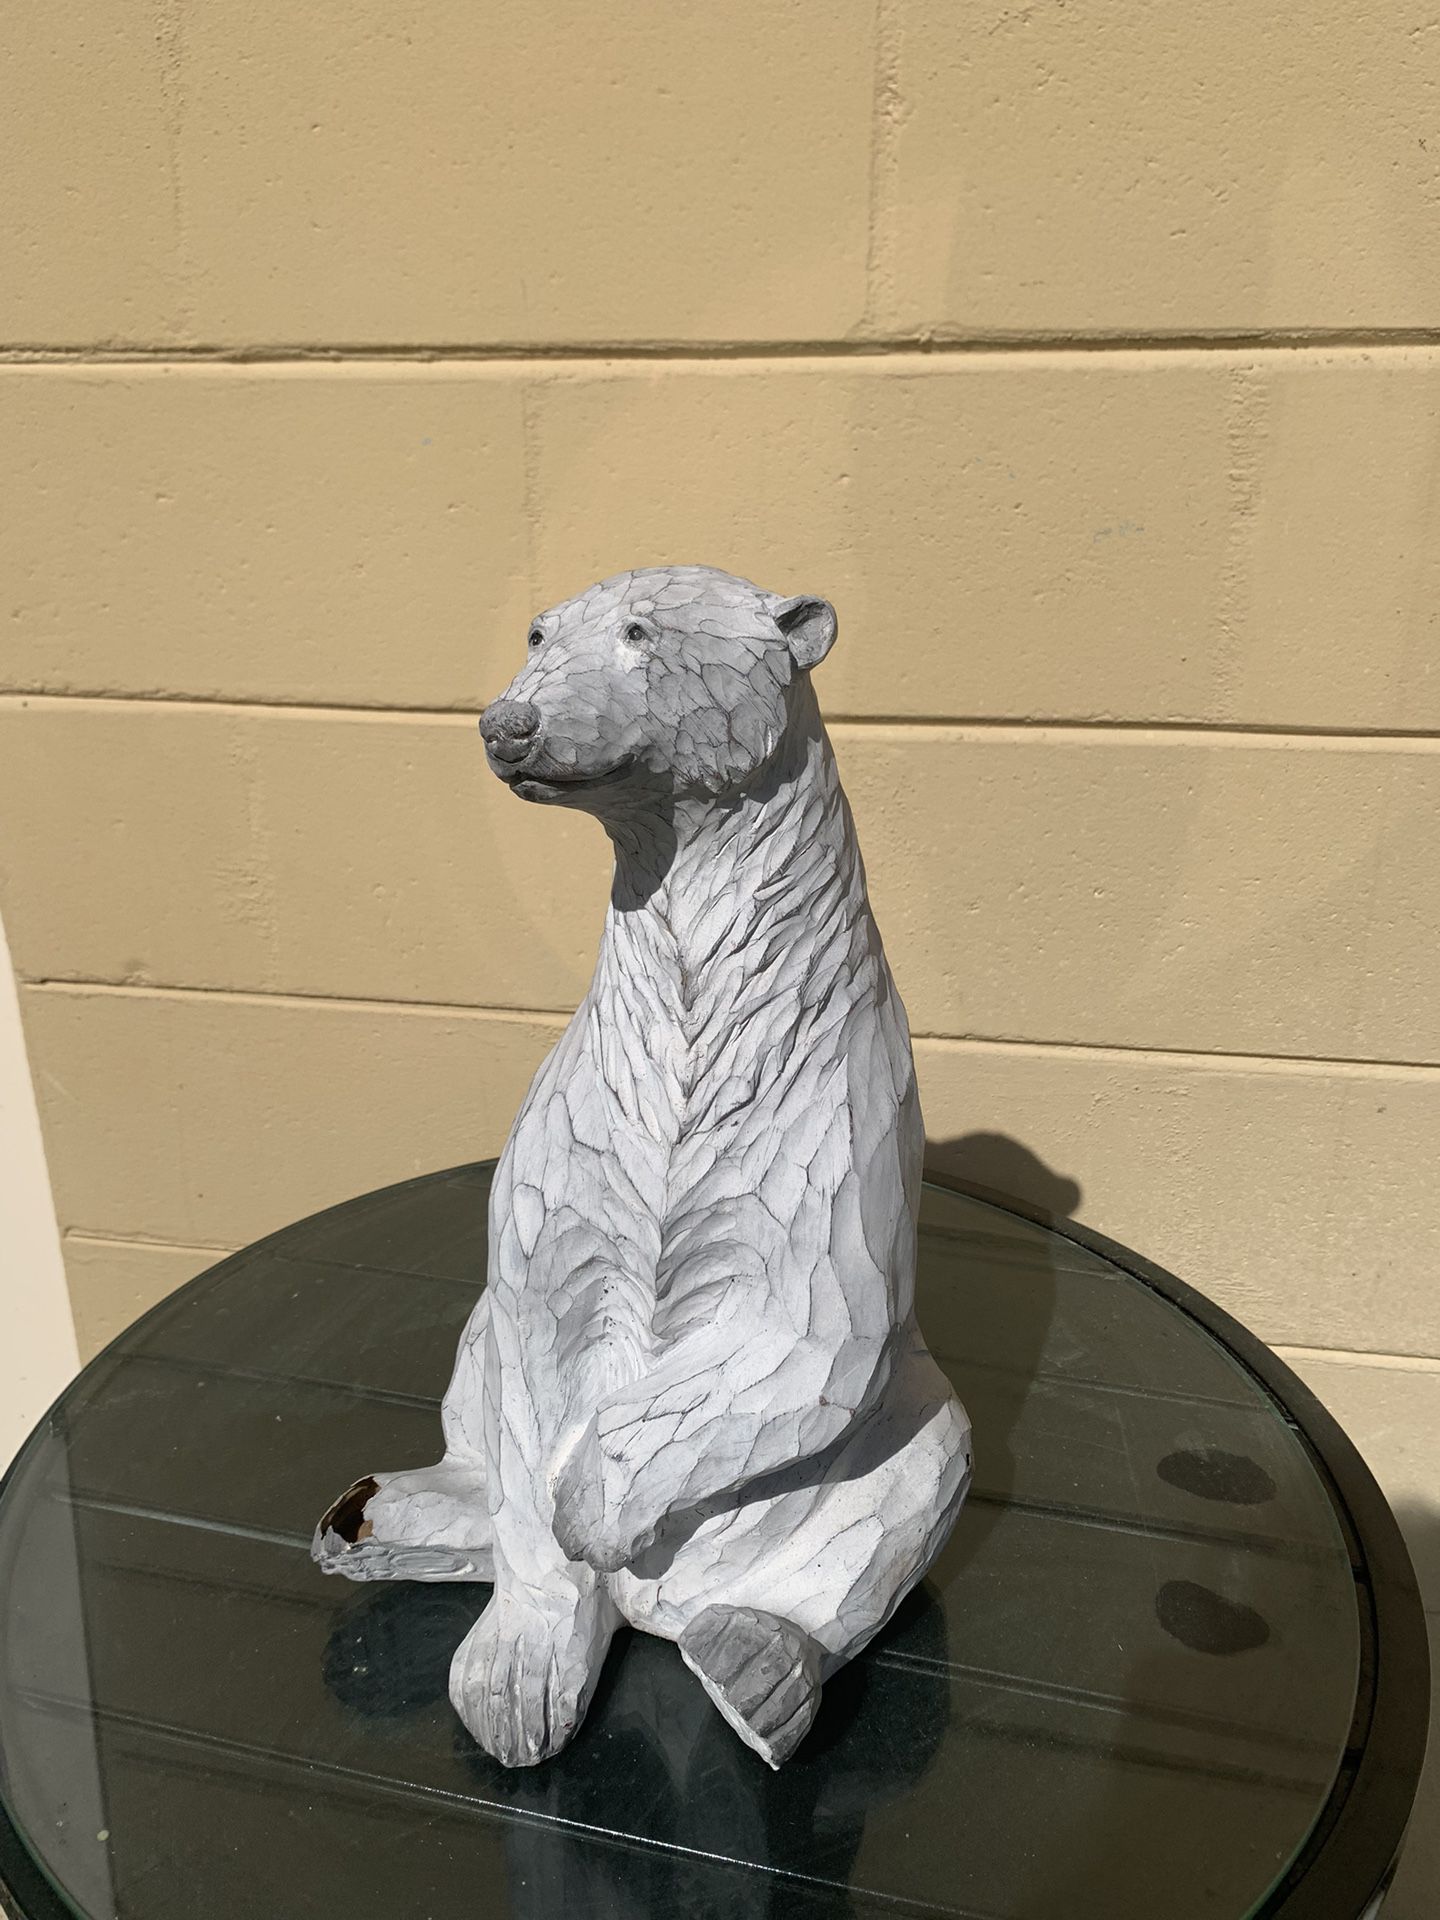 Polar bear garden statue, approximately 2 feet tall hollow small damage on foot, but doesn’t distract garden statue